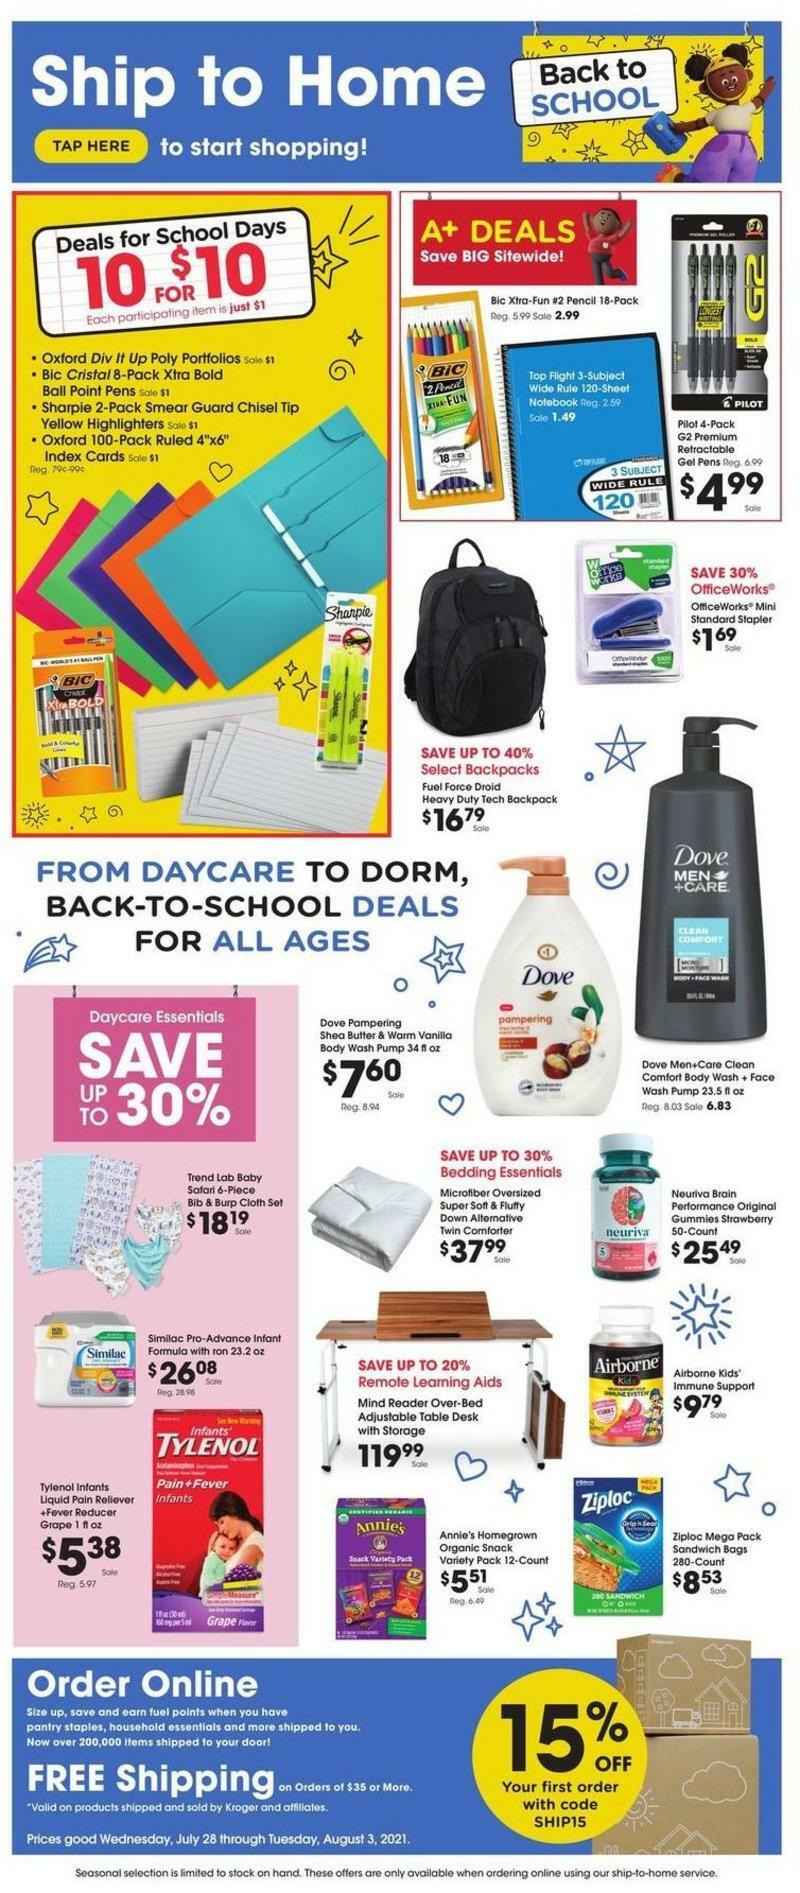 Kroger Ship to Home Weekly Ad from July 28